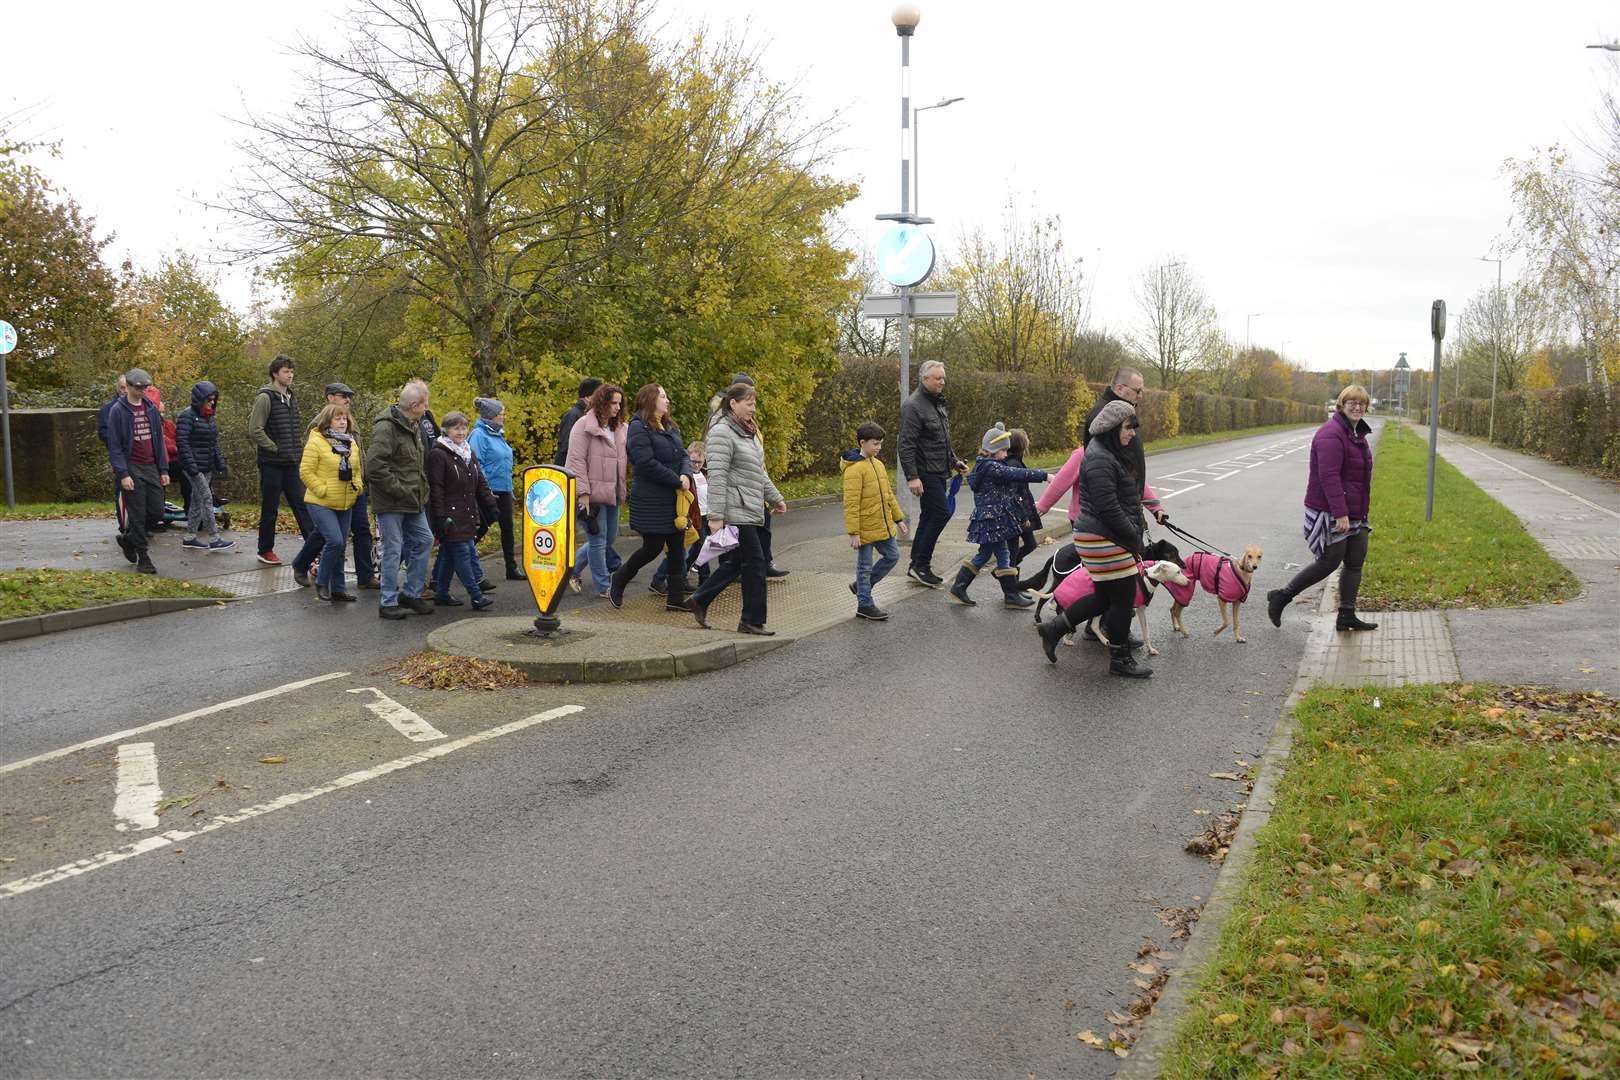 The Britannia Lane crossing that is causing residents concern. Picture: Paul Amos